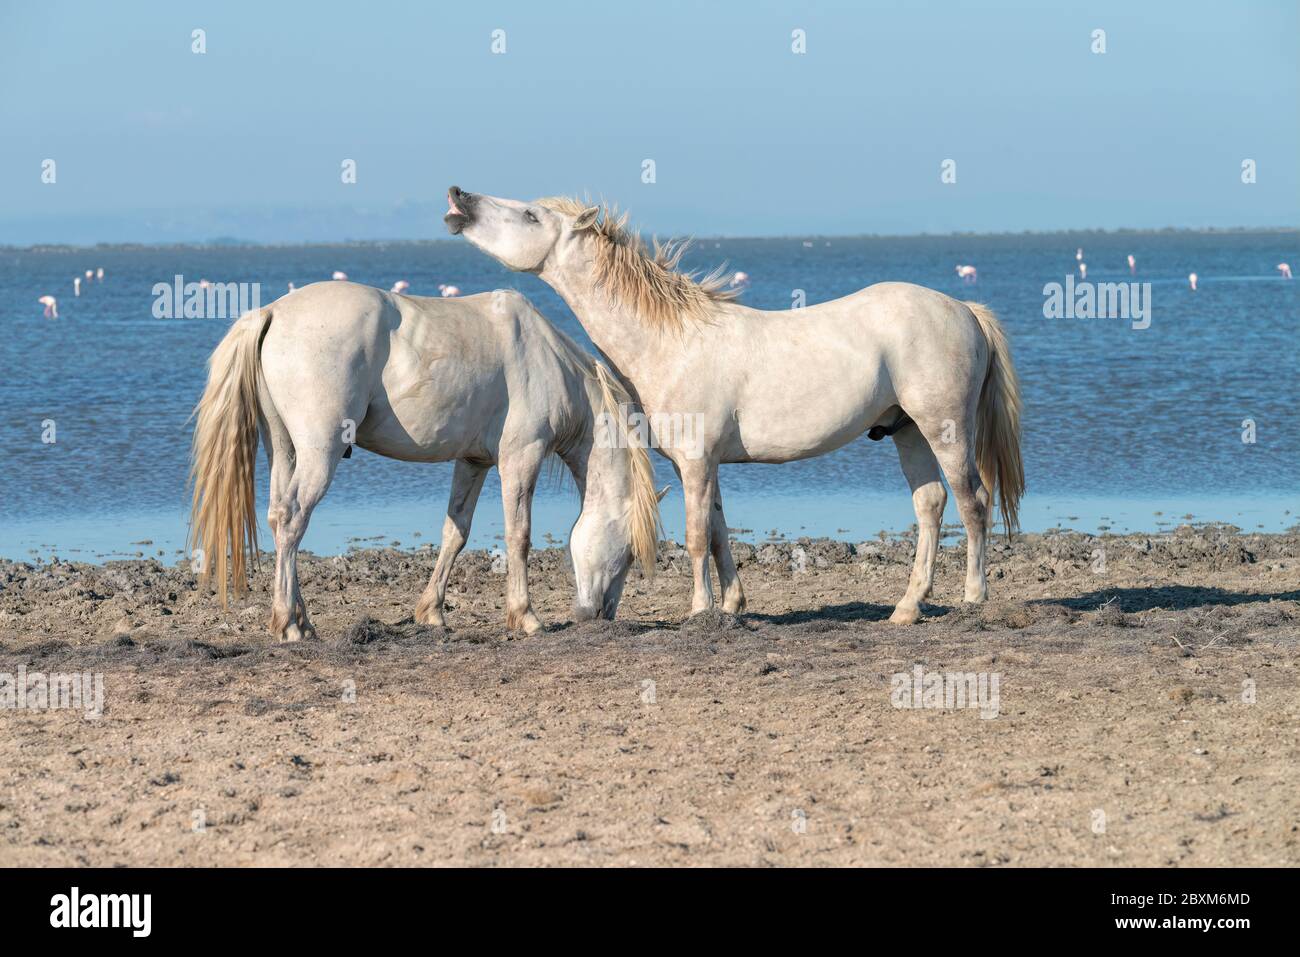 Two white horses on the beach, one grazing on hay, the other showing its teeth. Stock Photo